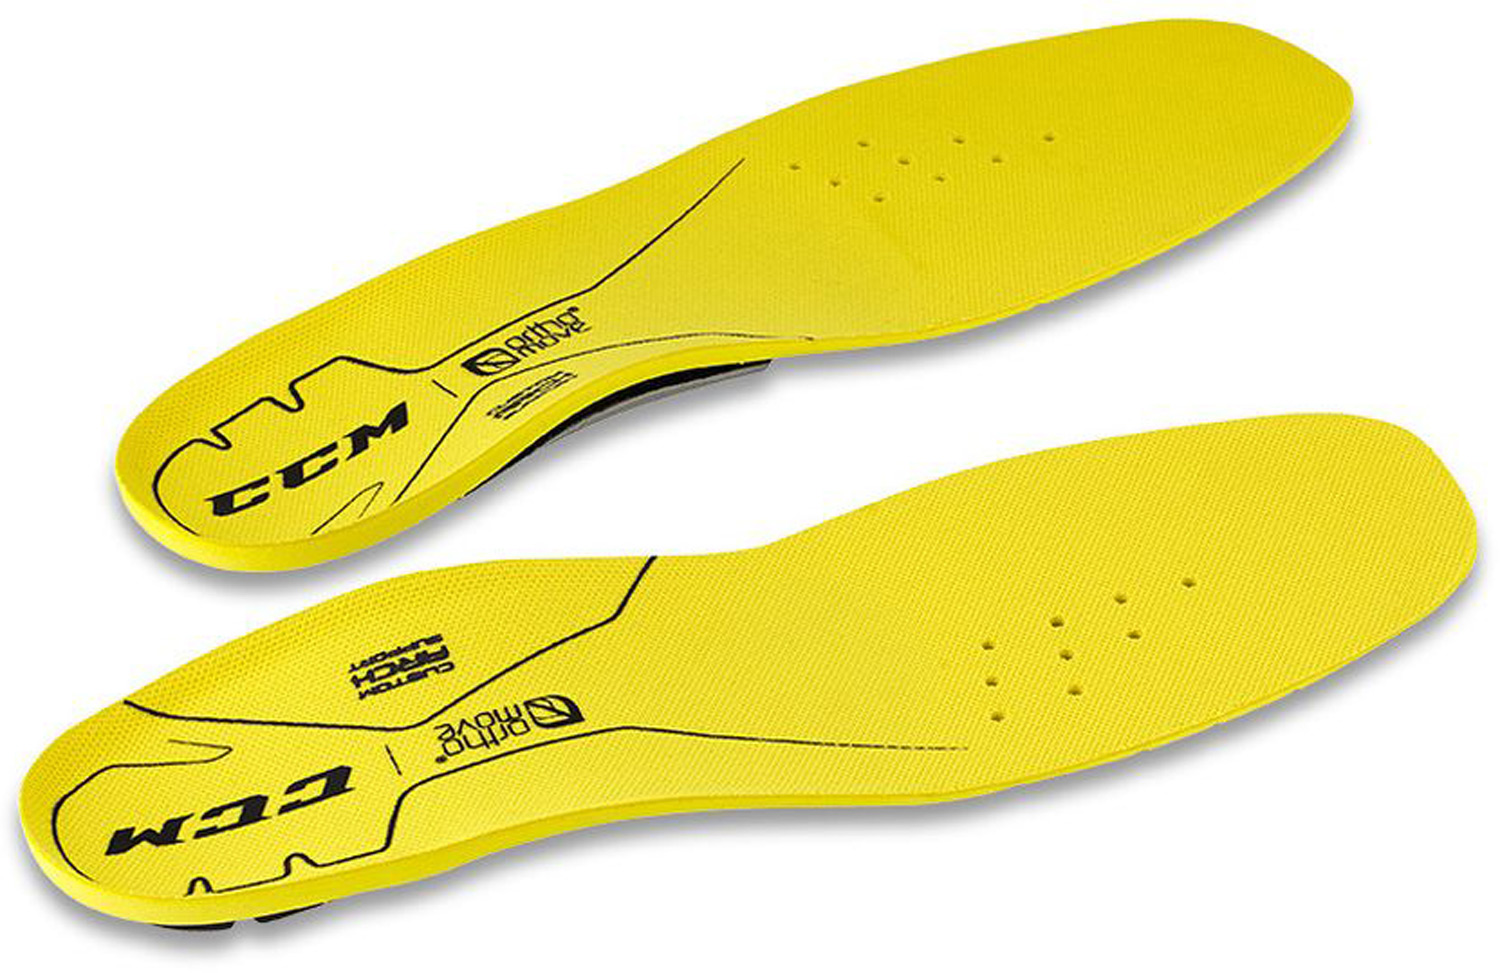 Skate insoles